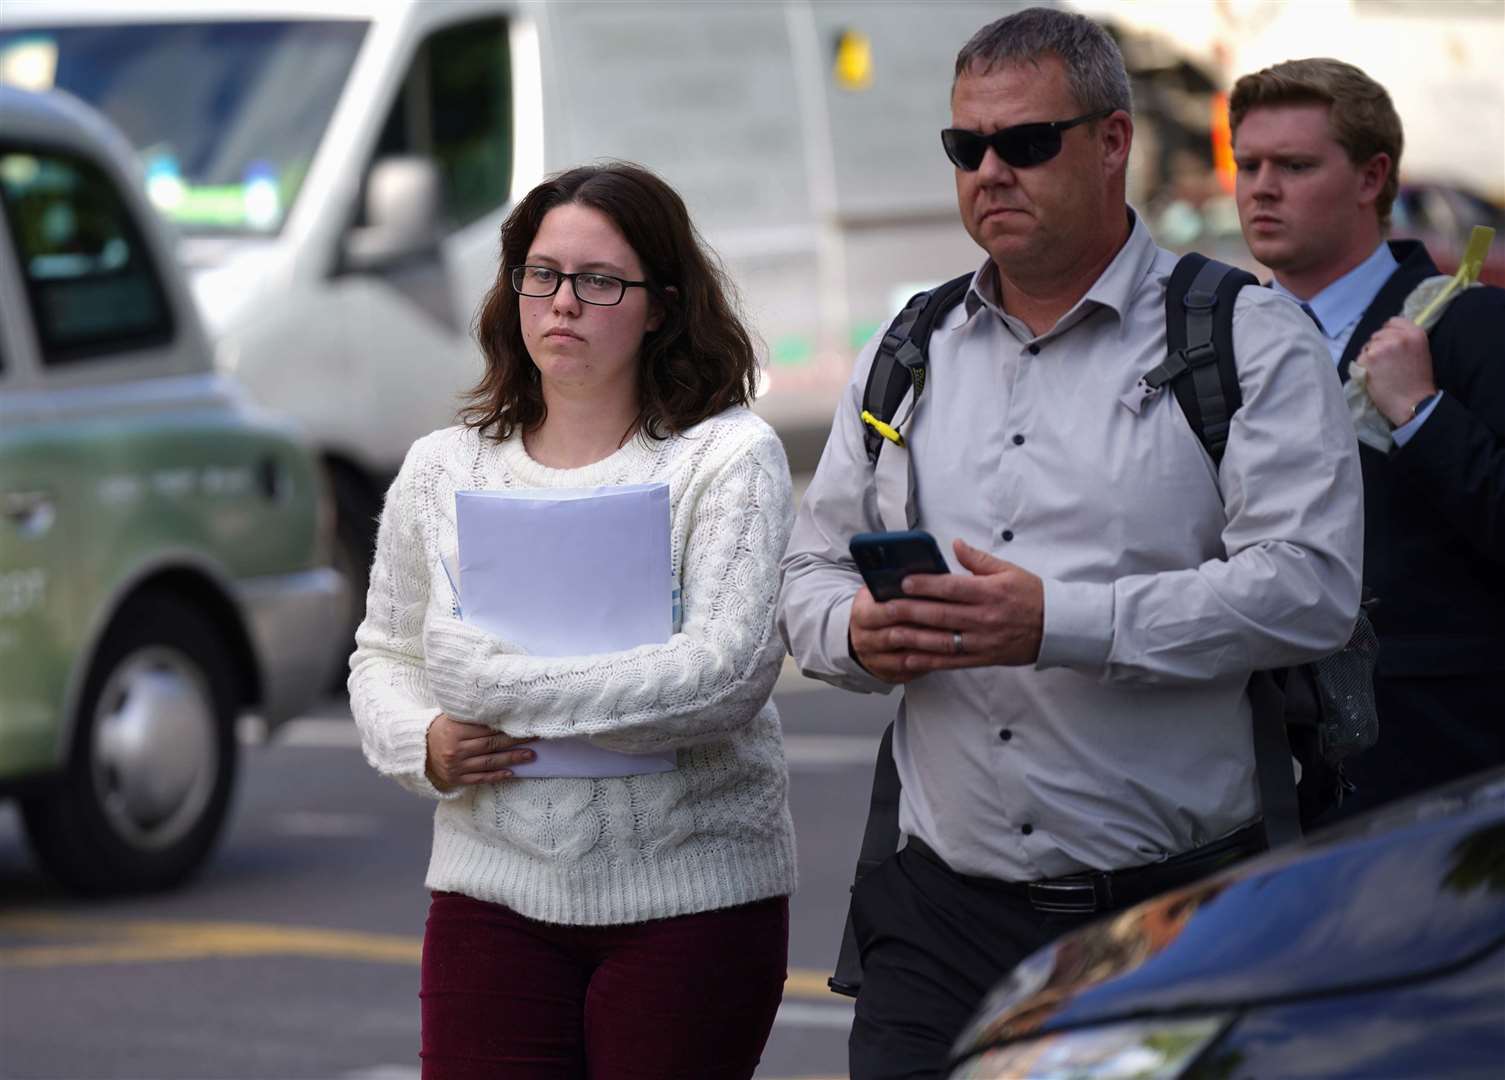 Mikayla Hayes’s barrister said she should be tried in the US because the crash happened while she was on duty (Yui Mok/PA)